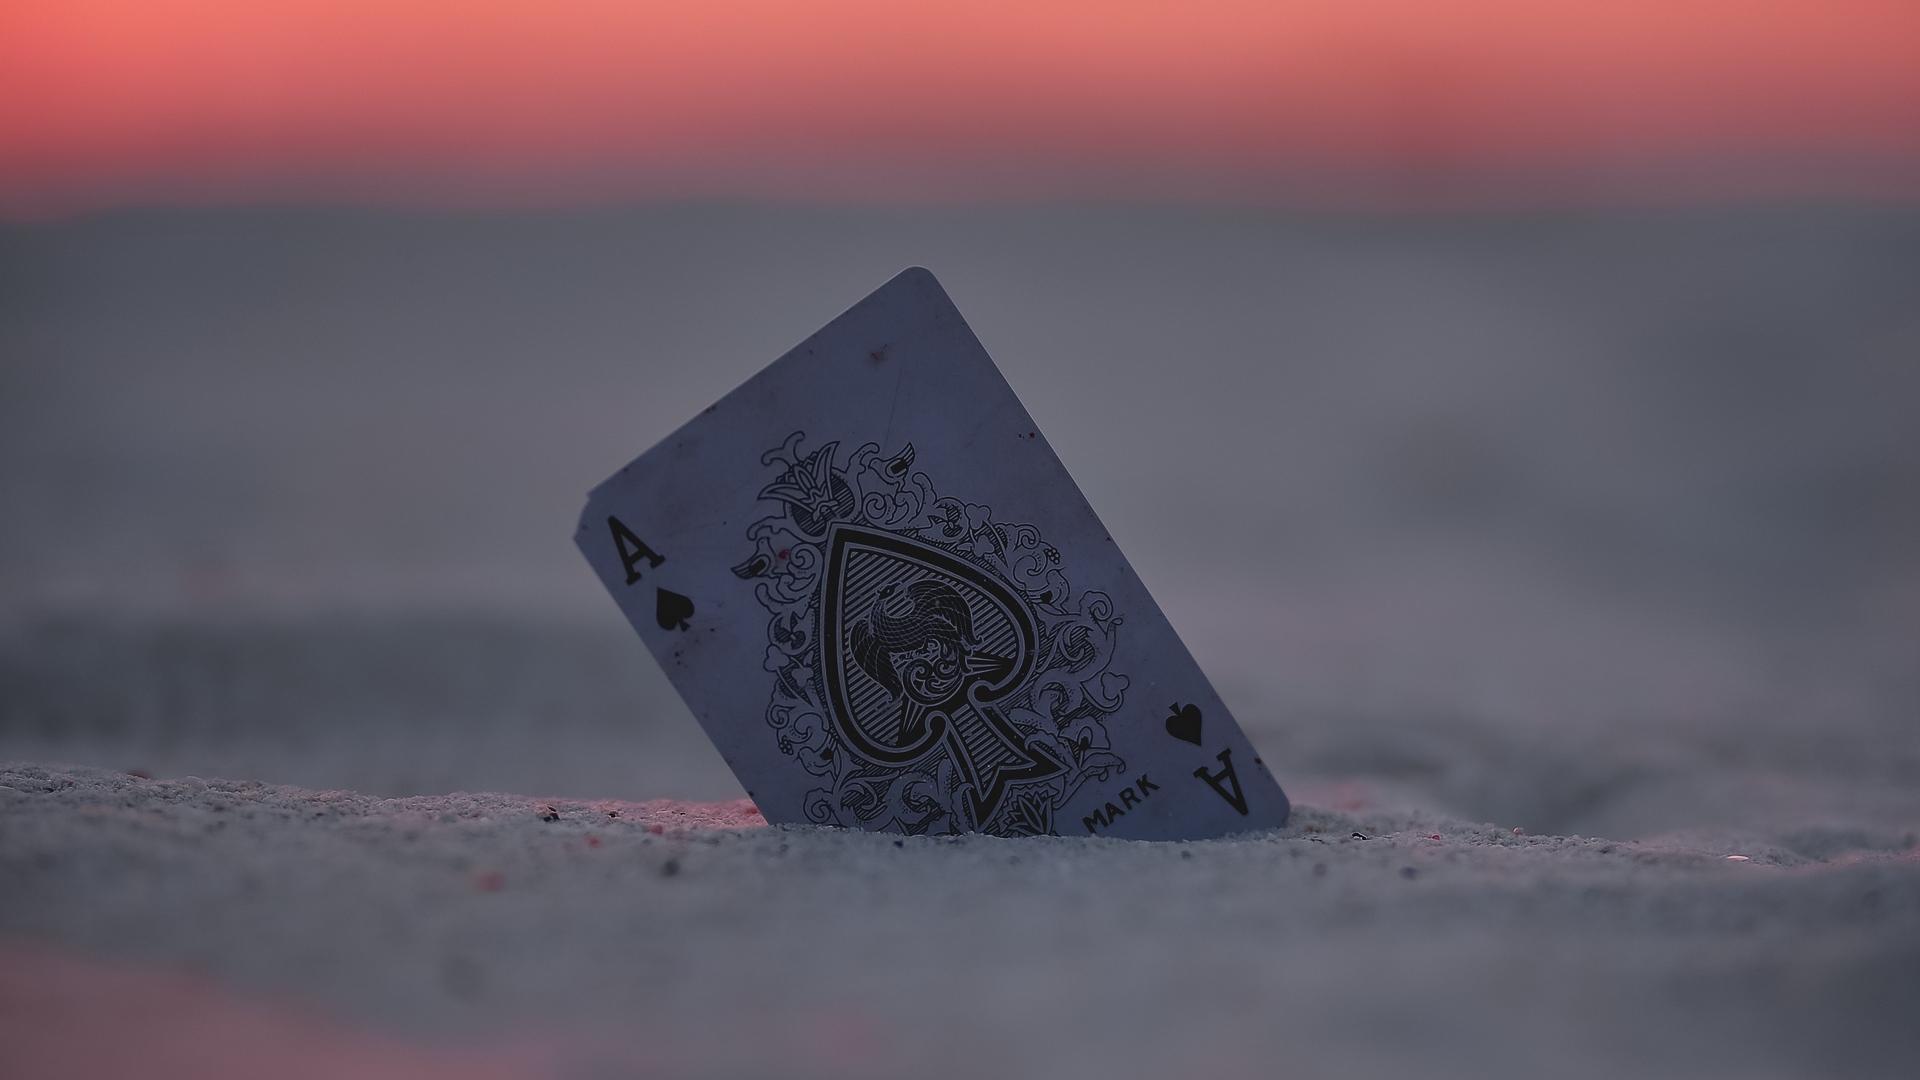 Download wallpaper 1920x1080 card, ace, sand, sunset